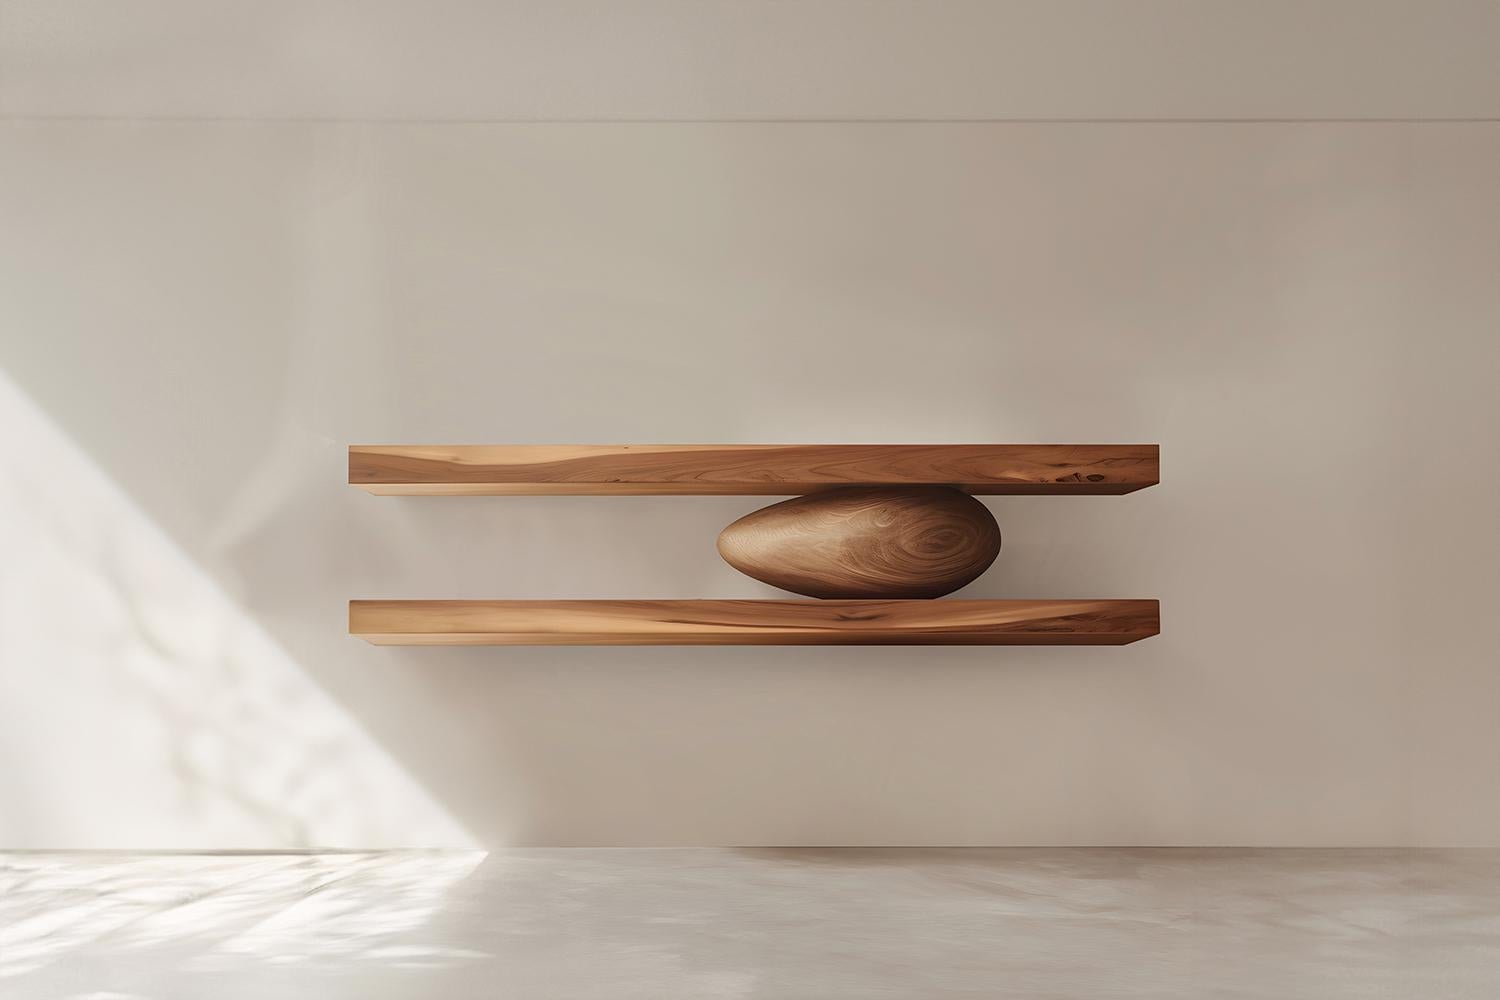 Set of Two Floating Shelves with One Sculptural Wooden Pebble Accent in the Middle, Sereno by Joel Escalona

—

What happens when the practical becomes art?
What happens when ornamentation gains significance?

Those were the questions Joel